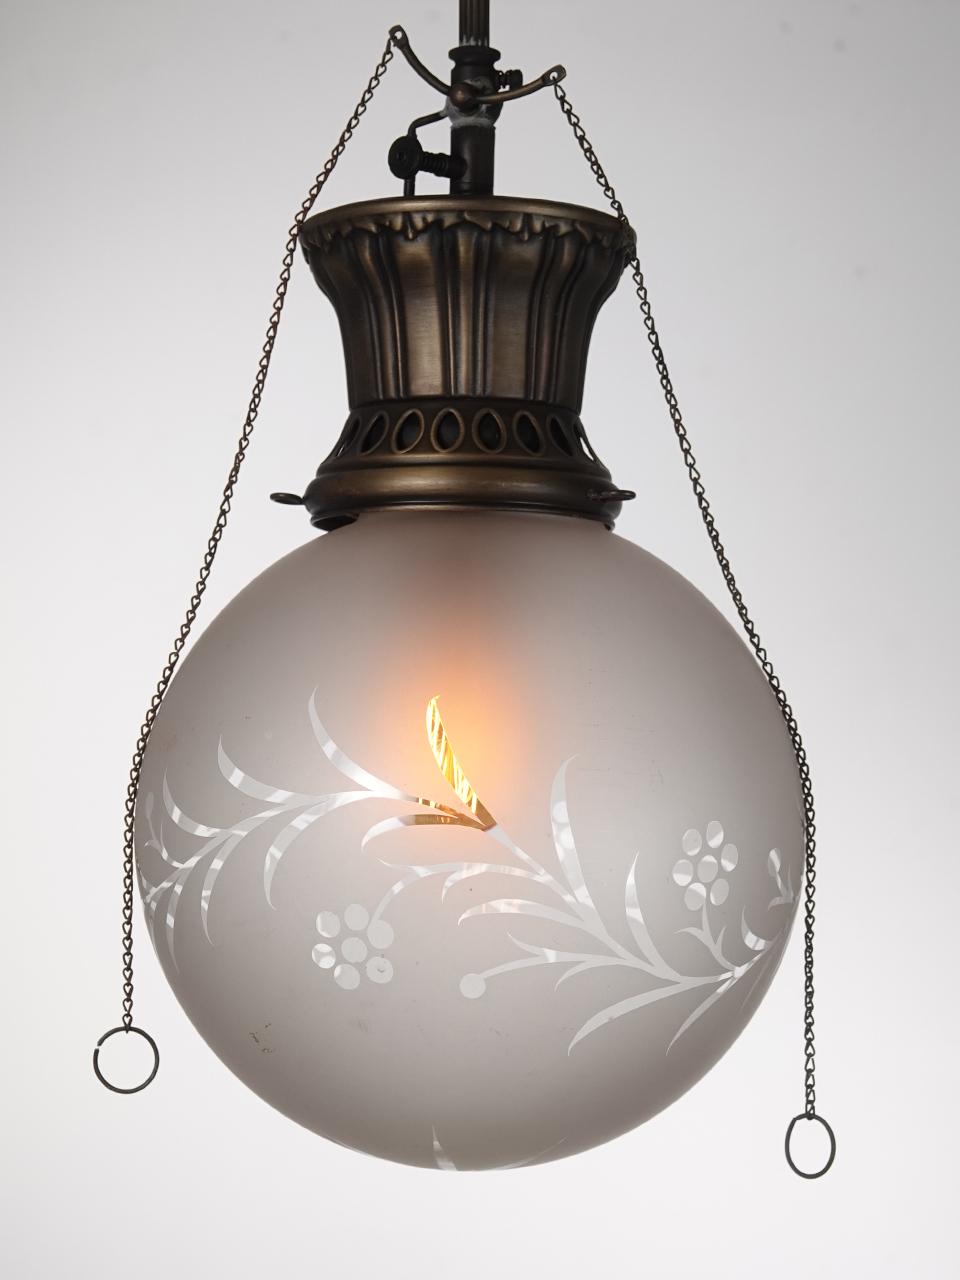 This is a nice, simple and elegant early gas pendent. It has been wired to now take a standard E12 bulb retaining the original look. The 8 inch frosted globe is hand cut to clear with a floral design. The crown is signed and still features the